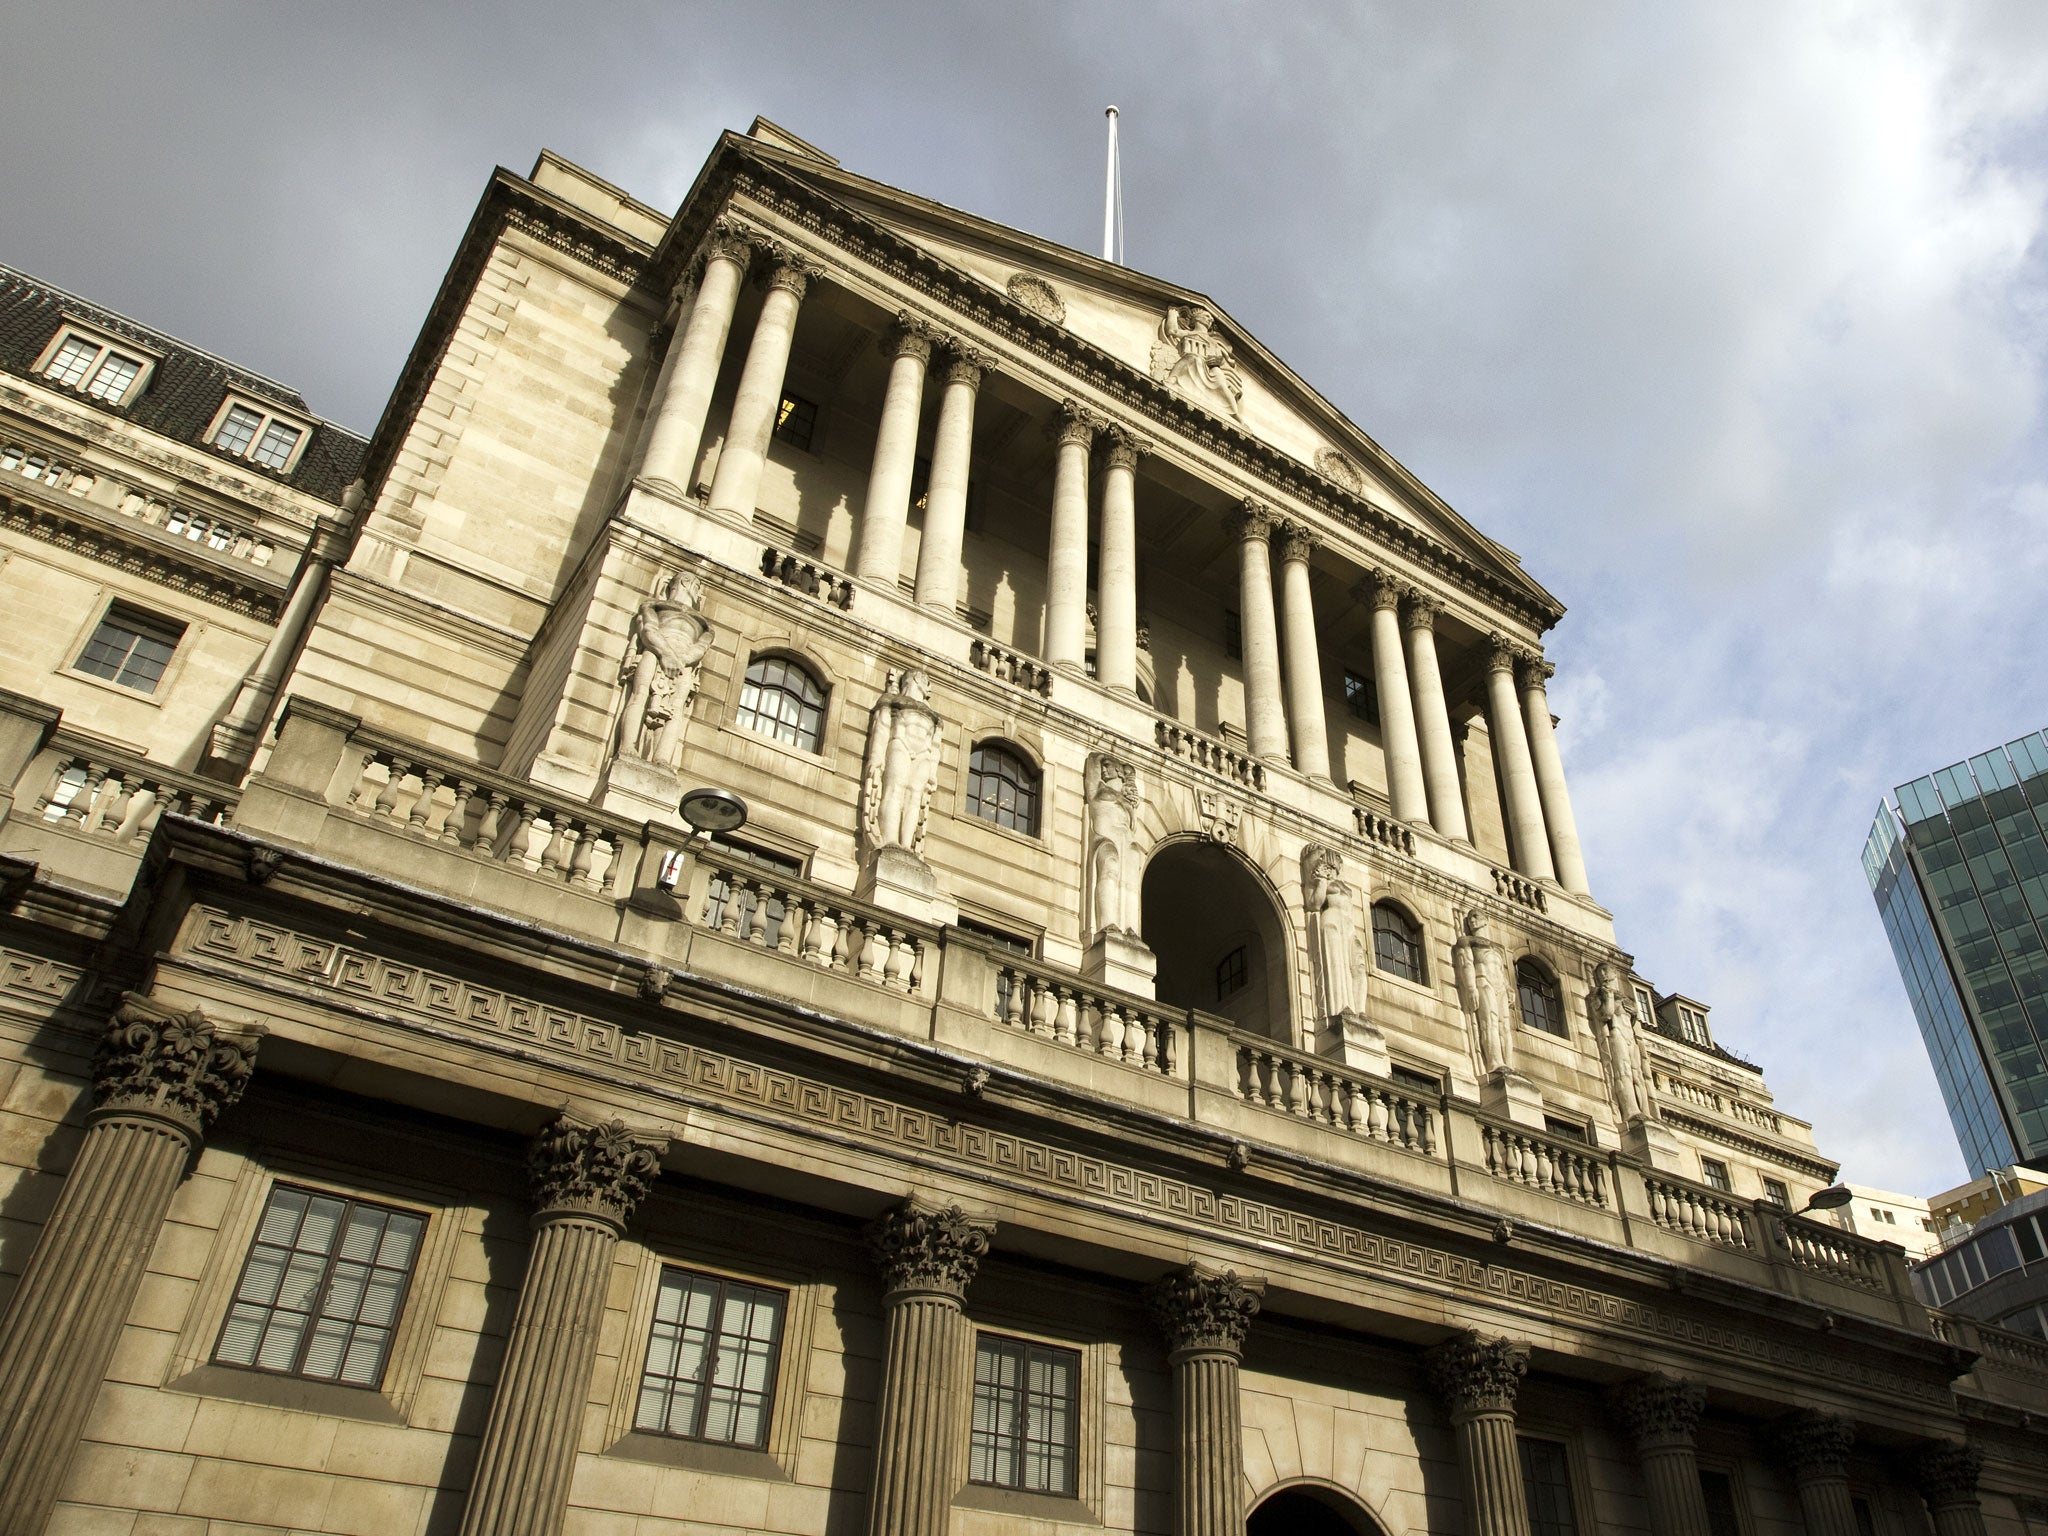 The Bank of England said it held copies of the textbook to support staff studying for A levels or other courses